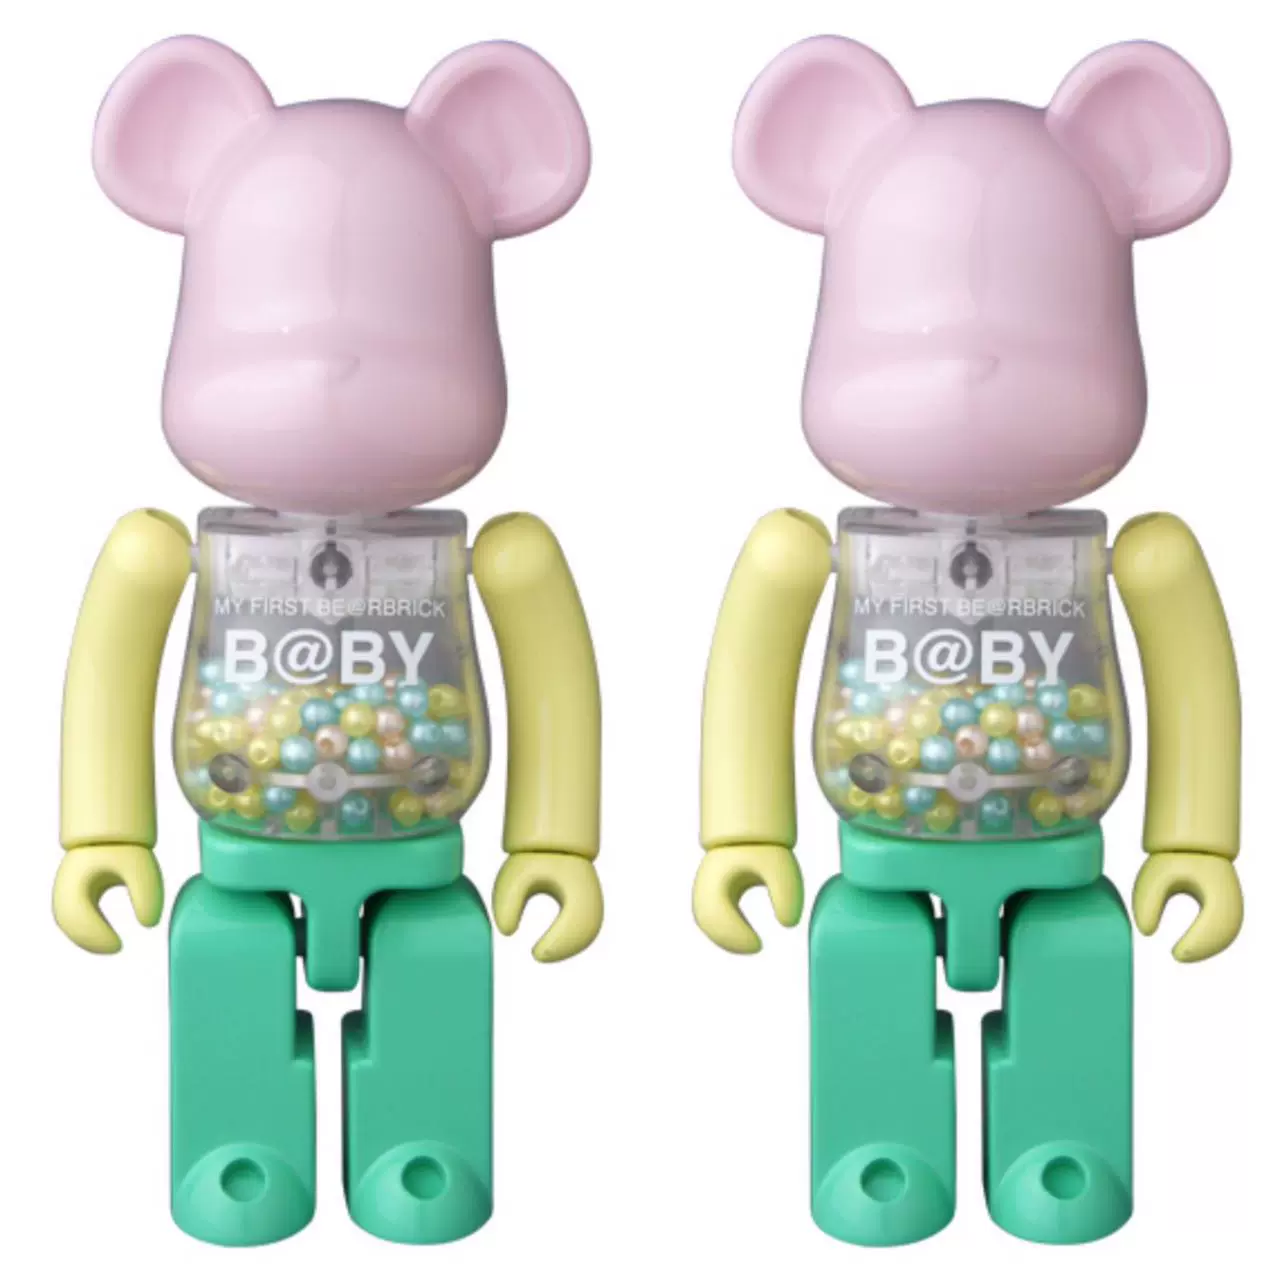 SALE品質保証超合金 MY FIRST BE@RBRICK BABY 1st color ver. キューブリック、ベアブリック